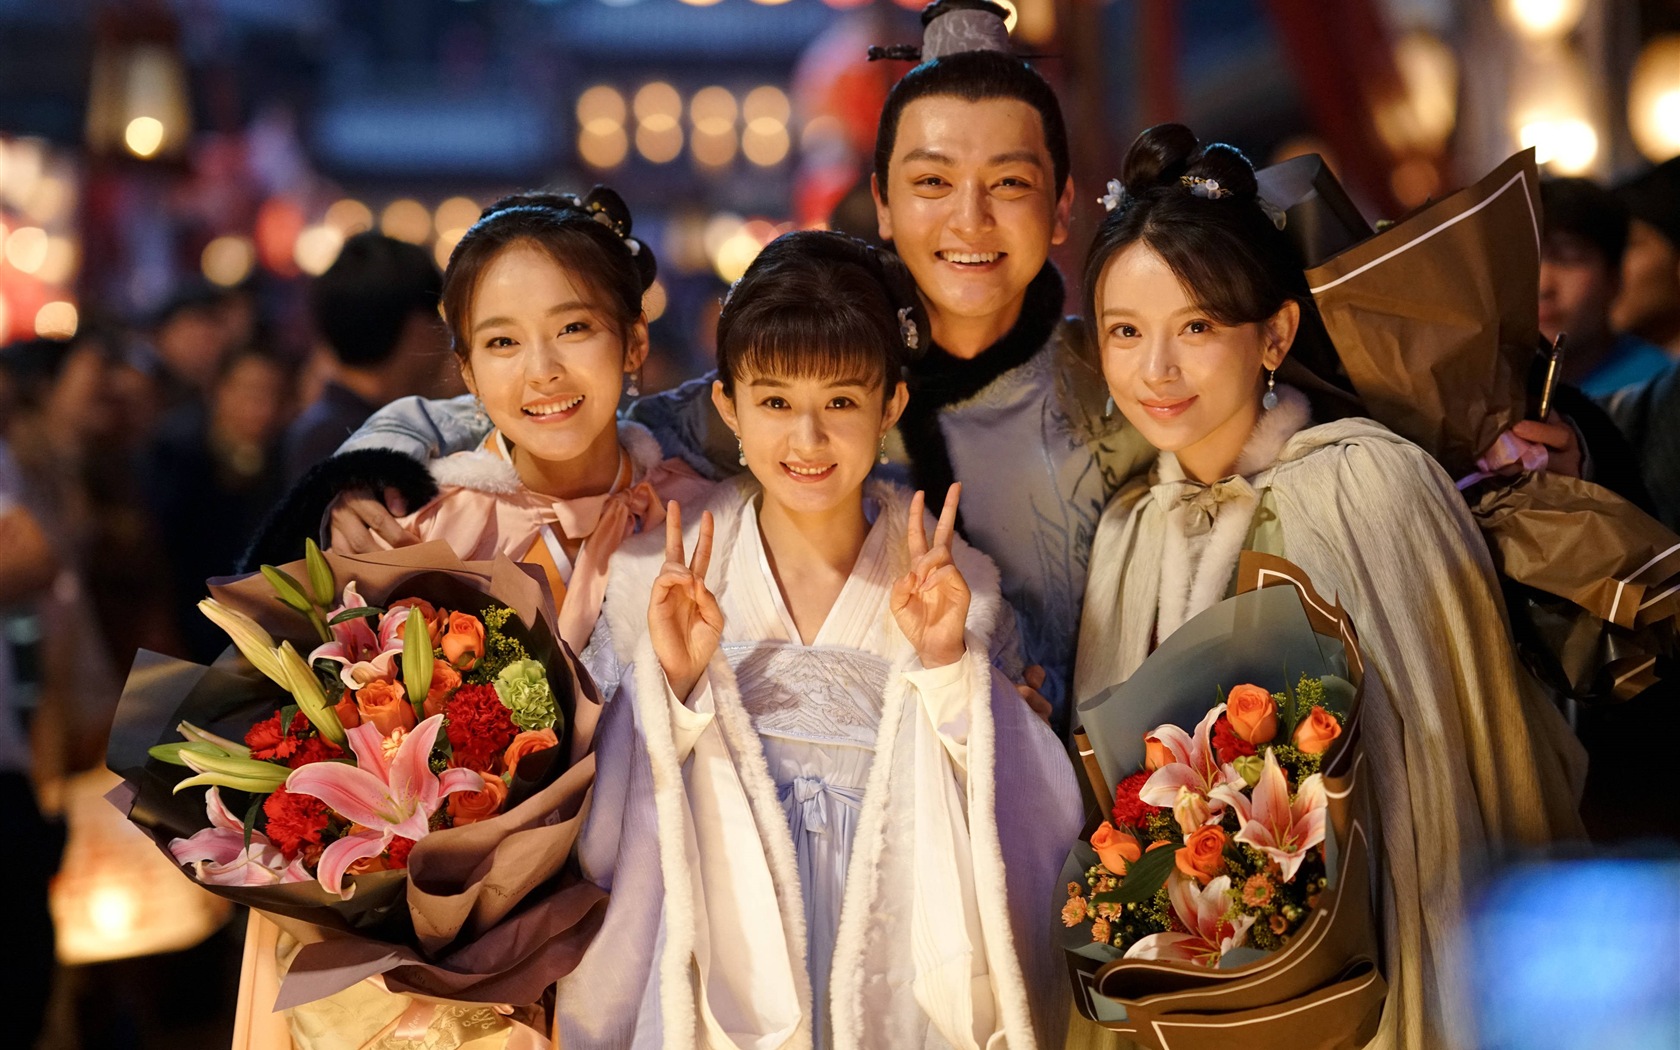 The Story Of MingLan, TV series HD wallpapers #48 - 1680x1050